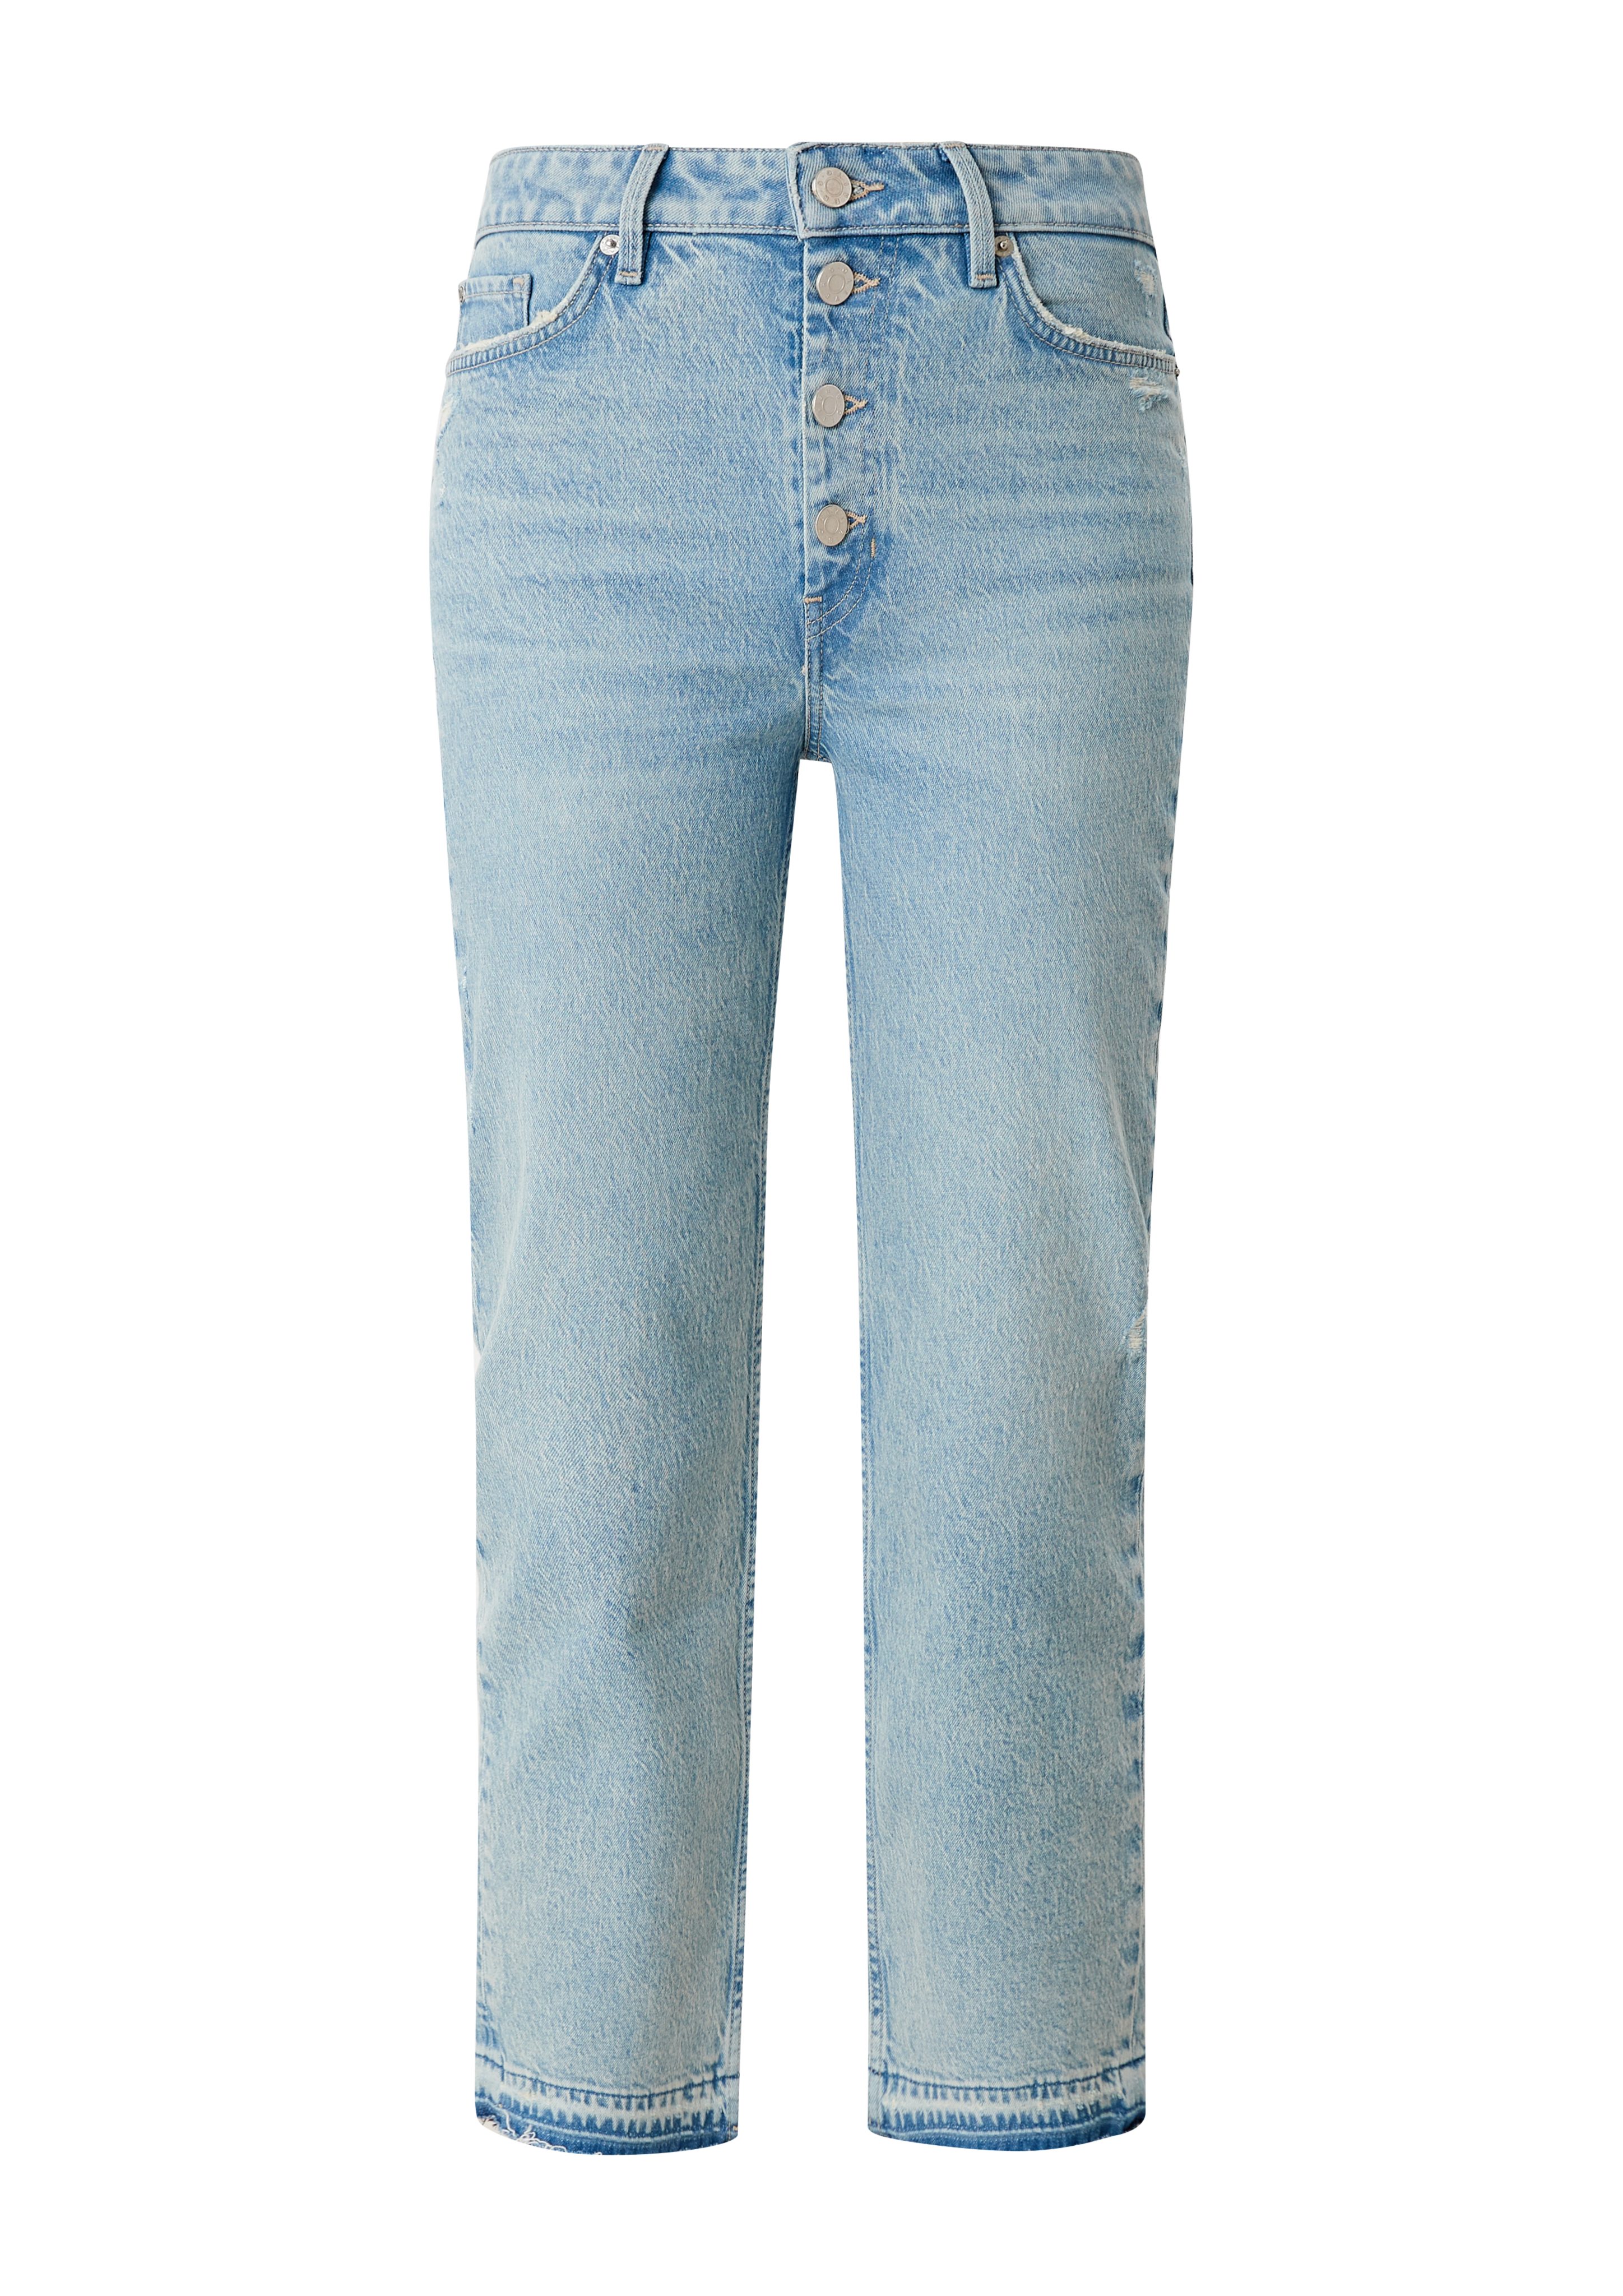 s.Oliver blue 7/8-Jeans Cropped Regular: Jeans powder Waschung